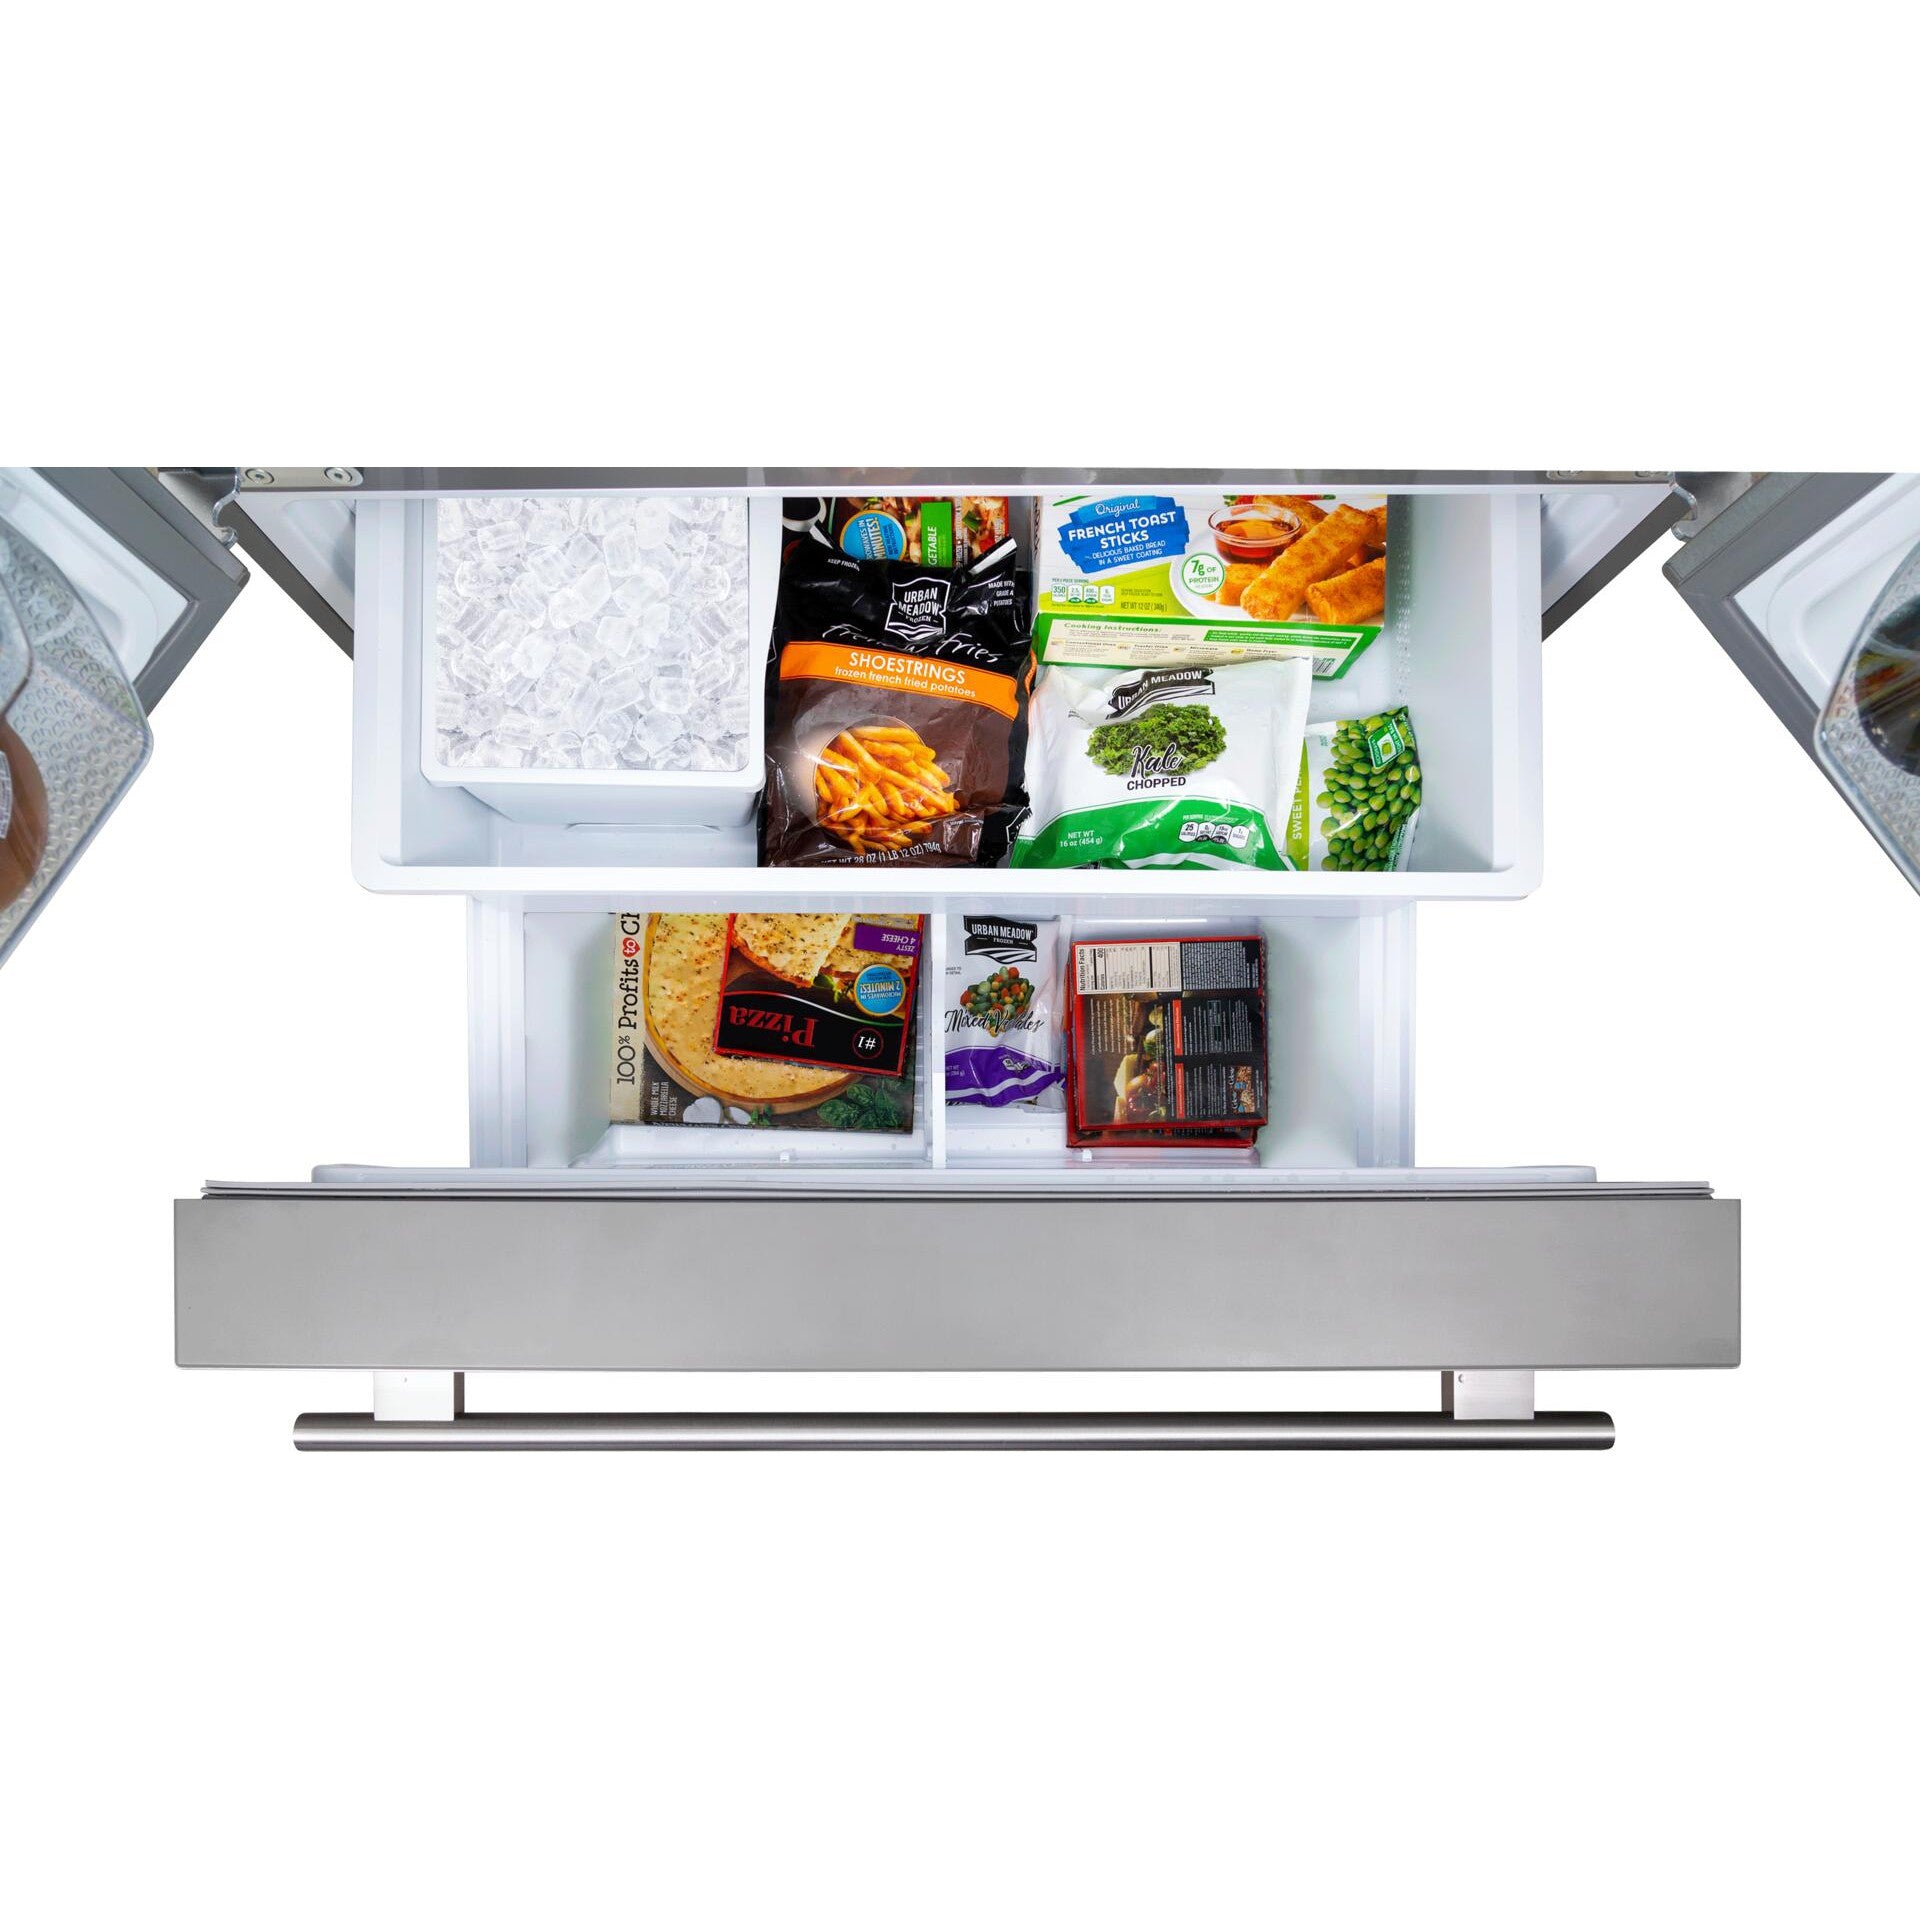 Forte 450 Series 36" 26.6 Cu. Ft. Stainless Steel French Door Refrigerator